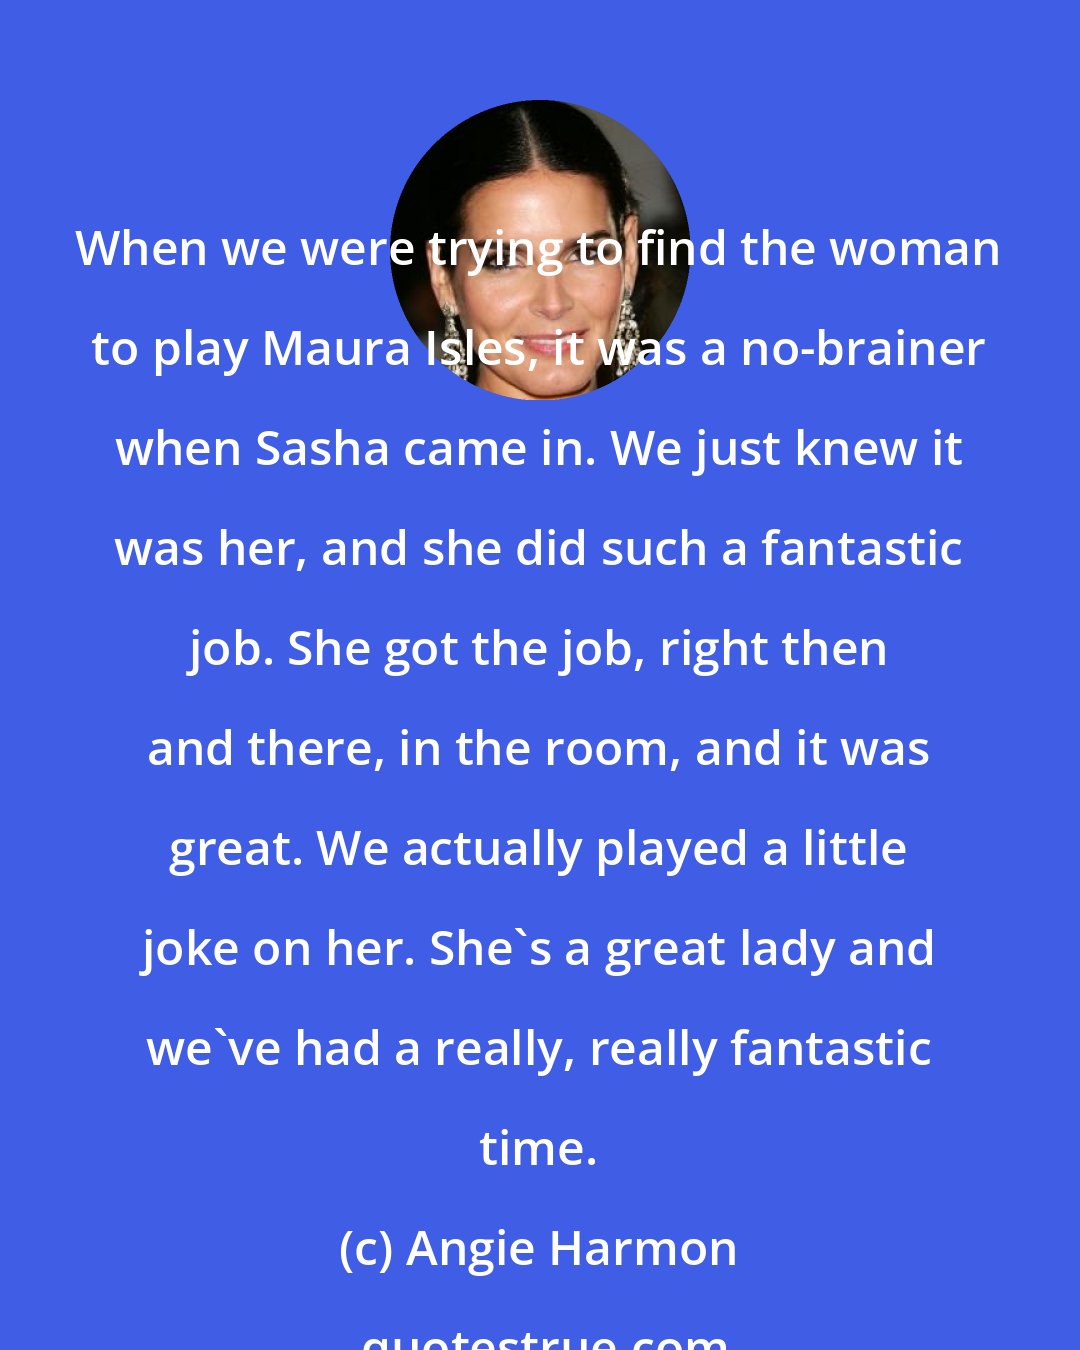 Angie Harmon: When we were trying to find the woman to play Maura Isles, it was a no-brainer when Sasha came in. We just knew it was her, and she did such a fantastic job. She got the job, right then and there, in the room, and it was great. We actually played a little joke on her. She's a great lady and we've had a really, really fantastic time.